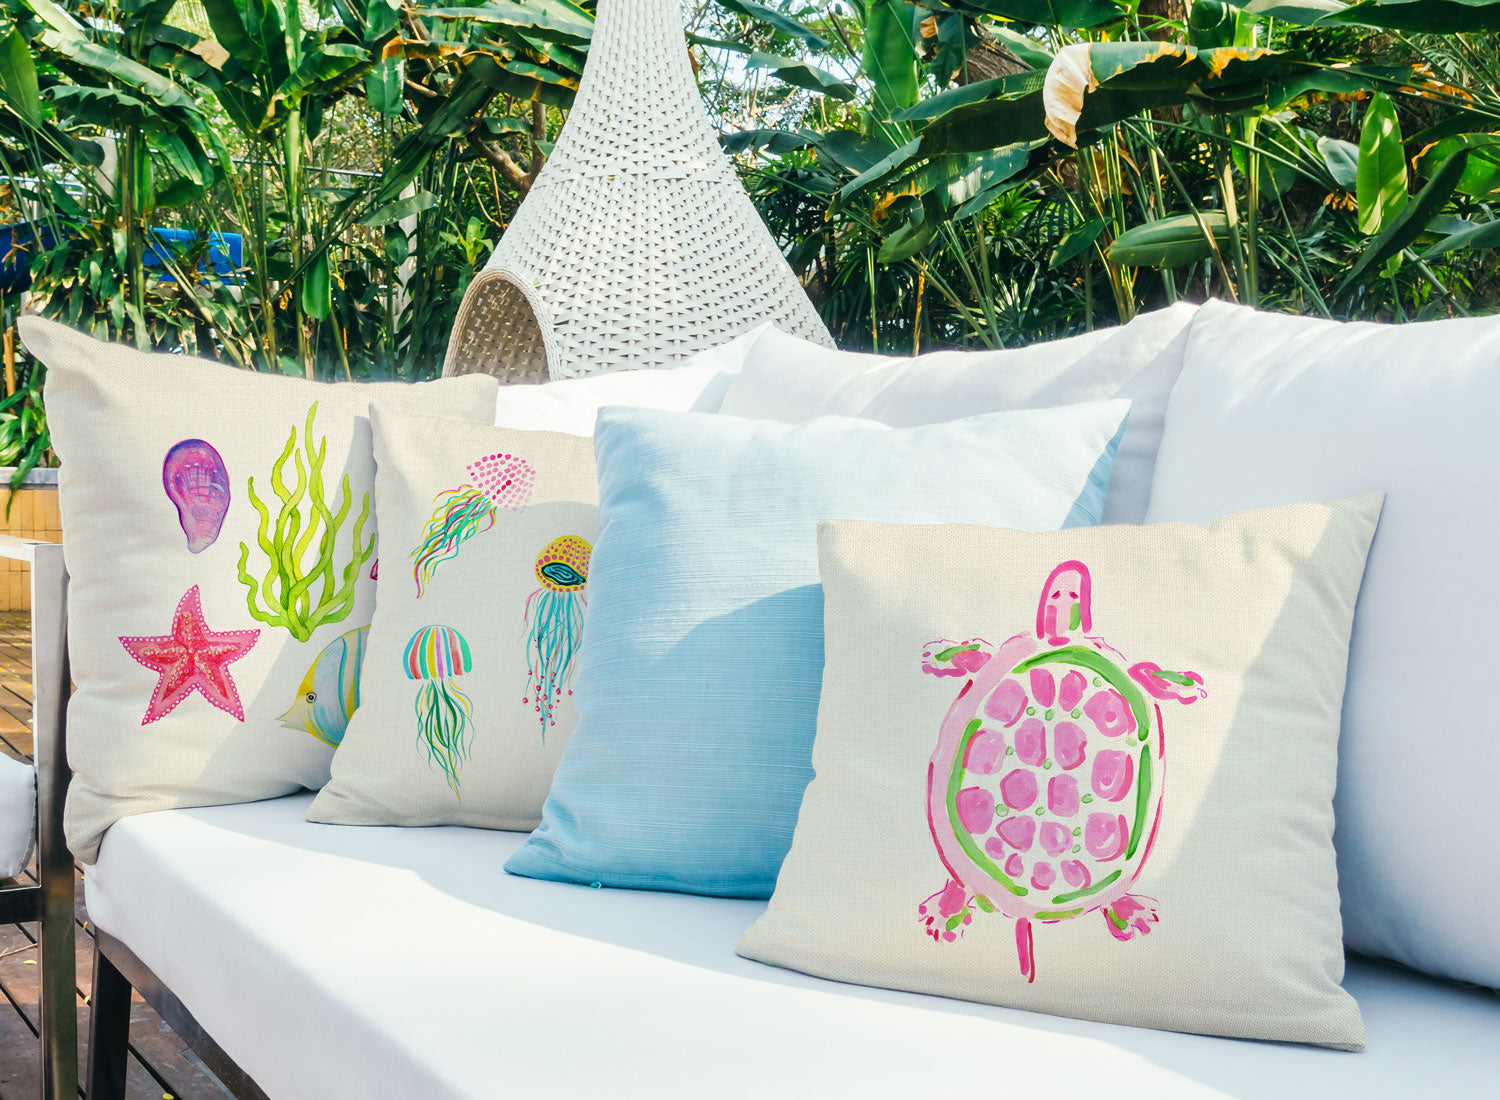 Sea Turtle Pink Throw Pillow Cover - Coastal Designs Throw Pillow Cover Collection-Di Lewis